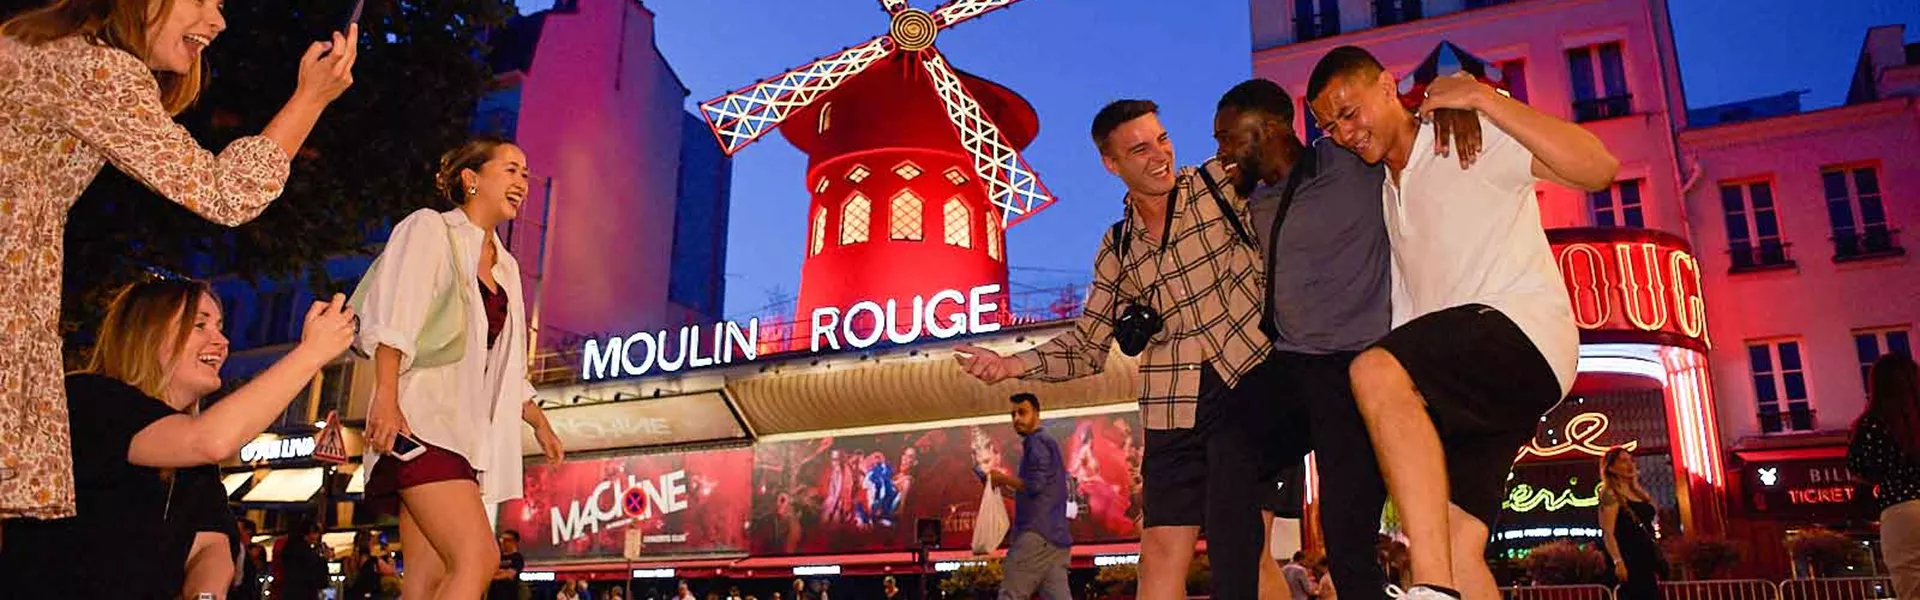 Group Of You Travelers Dancing Outside Moulin Rouge France Lg 2887EURS2022